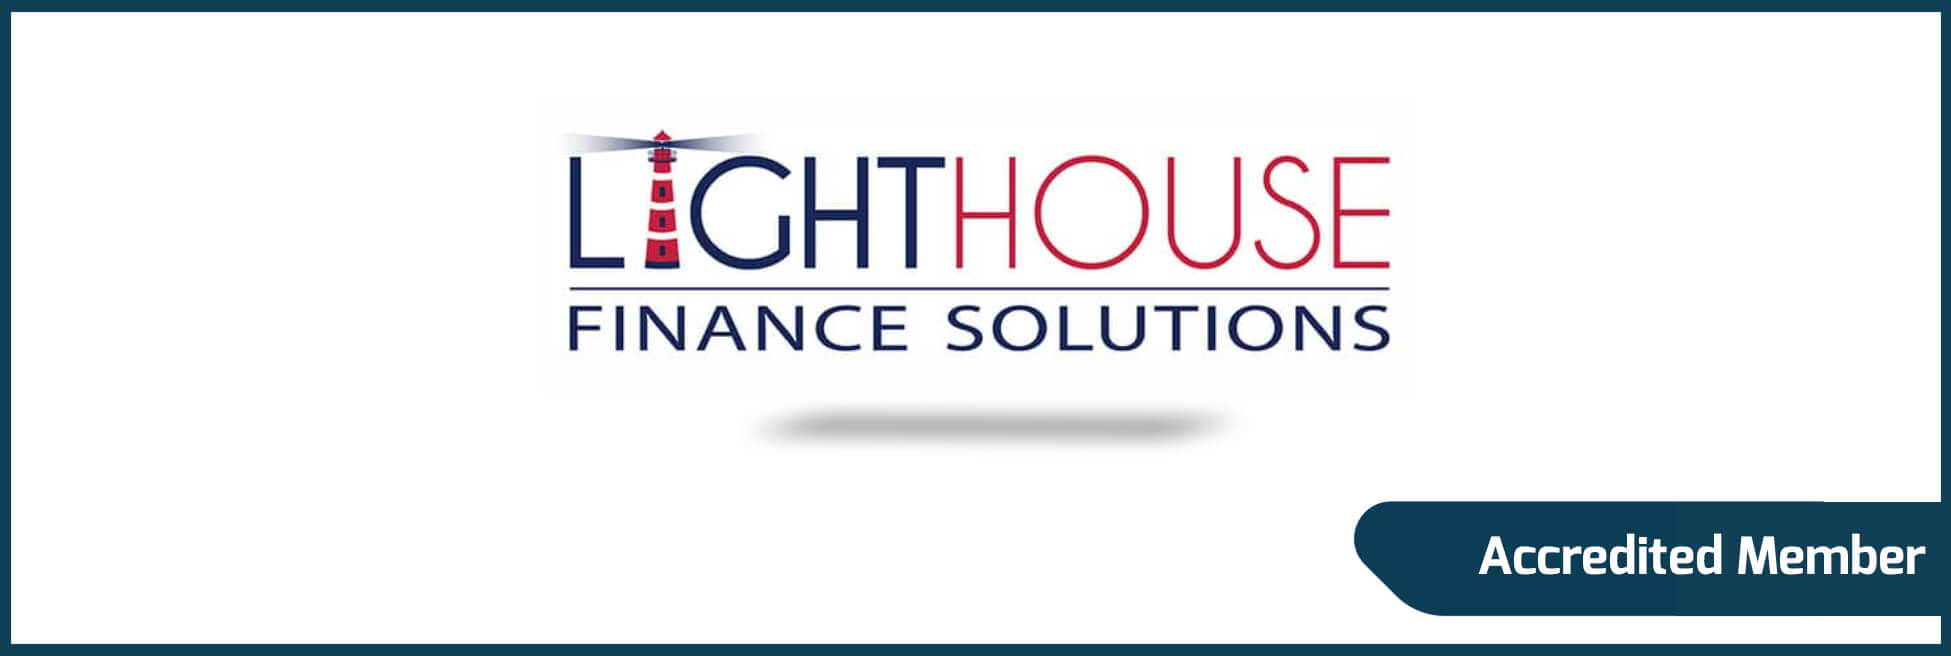 Lighthouse Finance Solutions